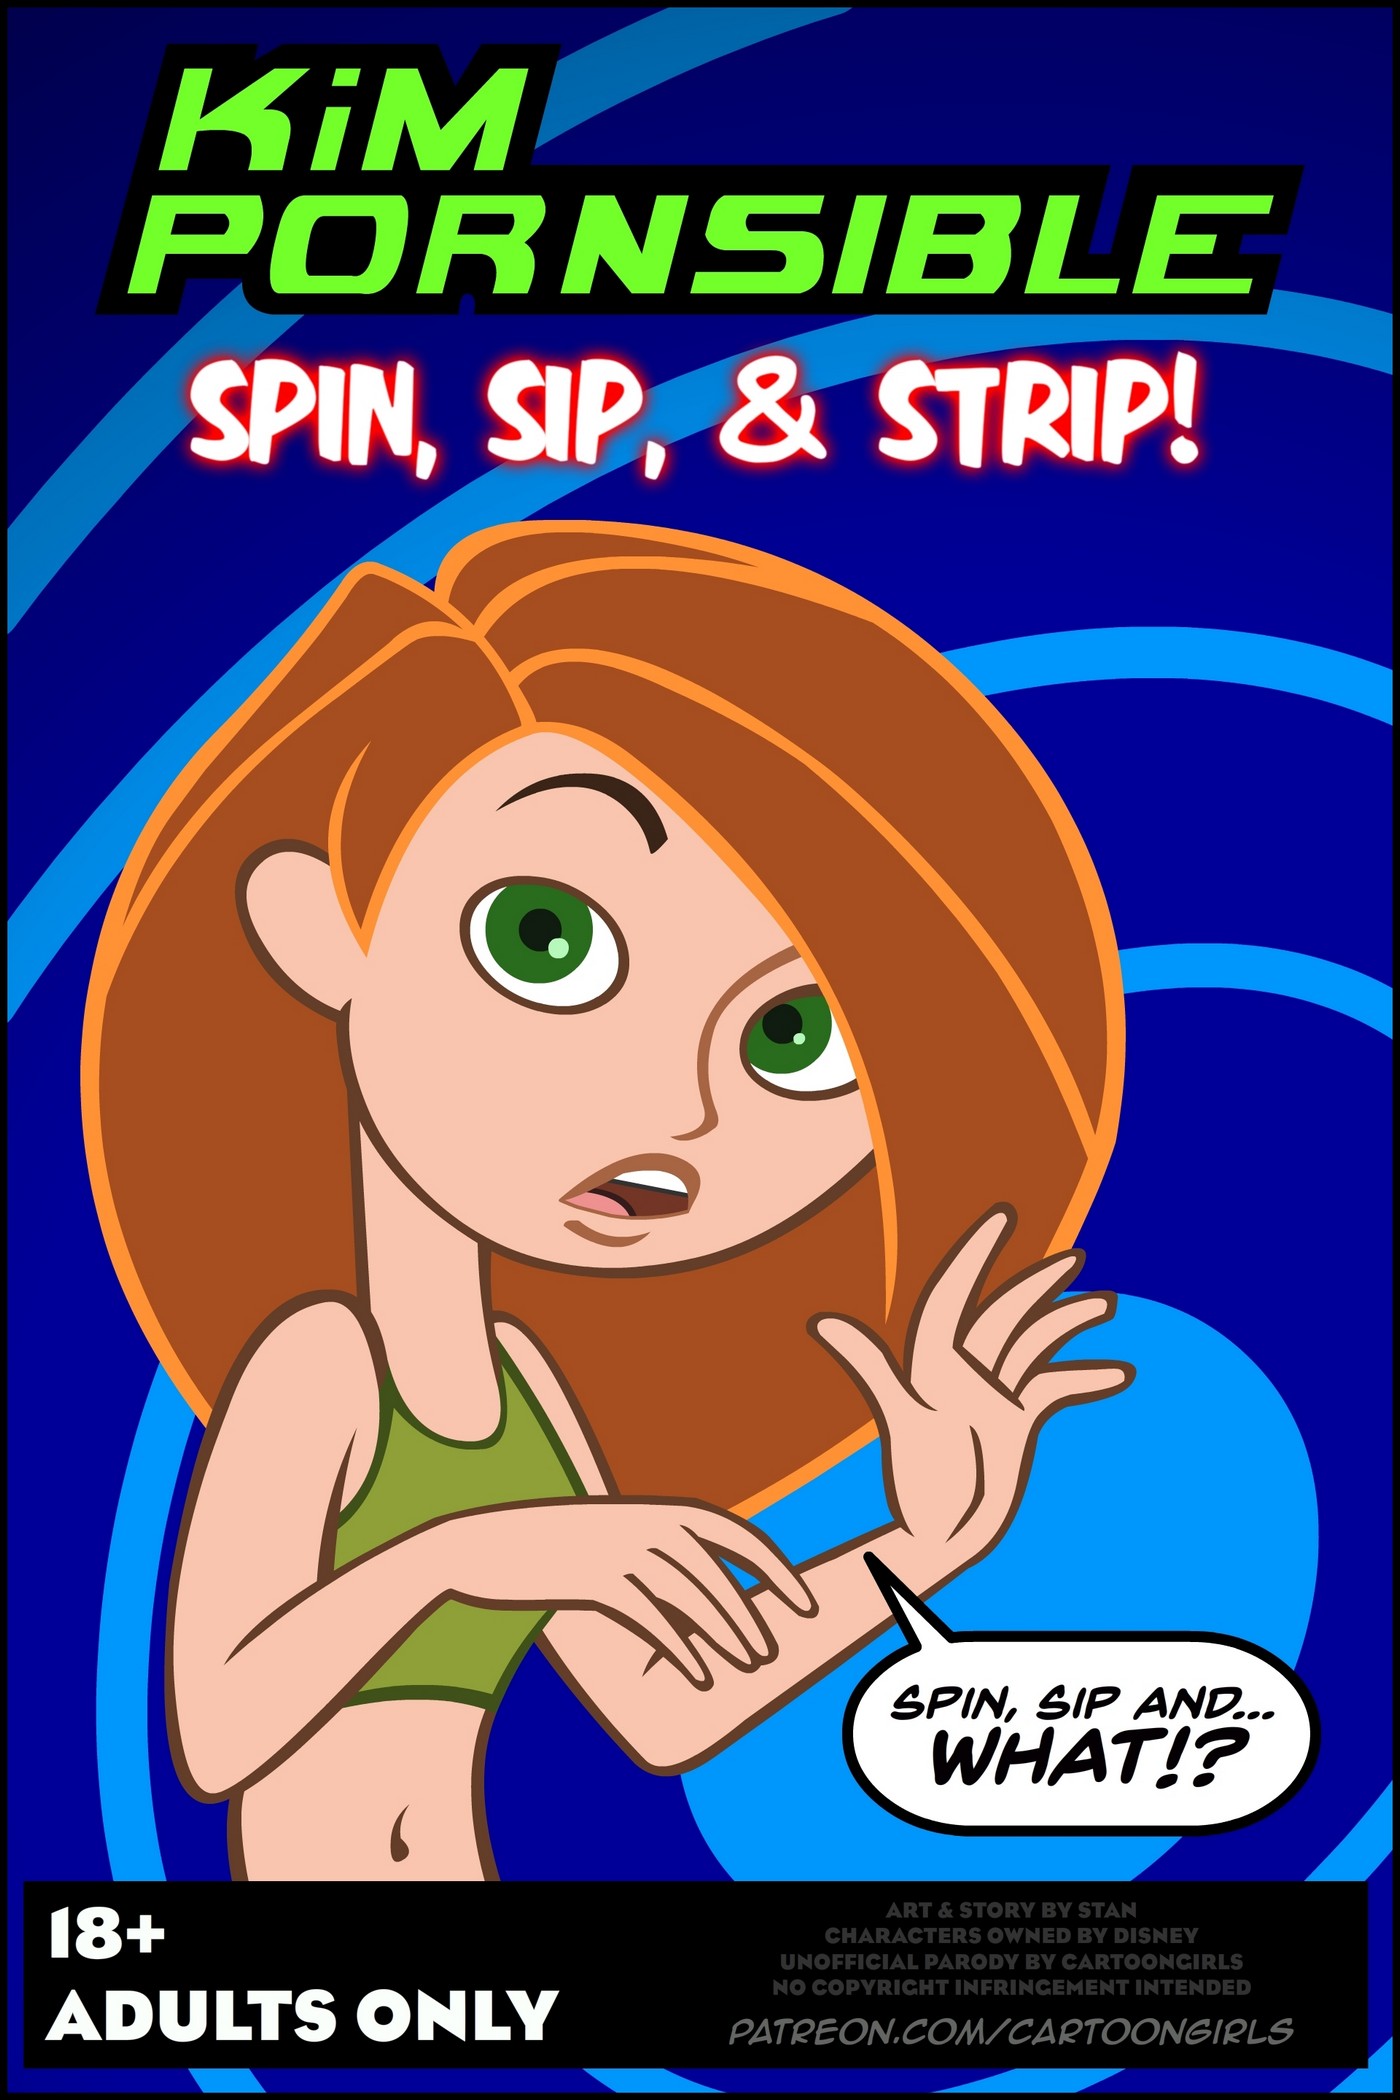 Kim Possible Spin, Sip and Strip! pic